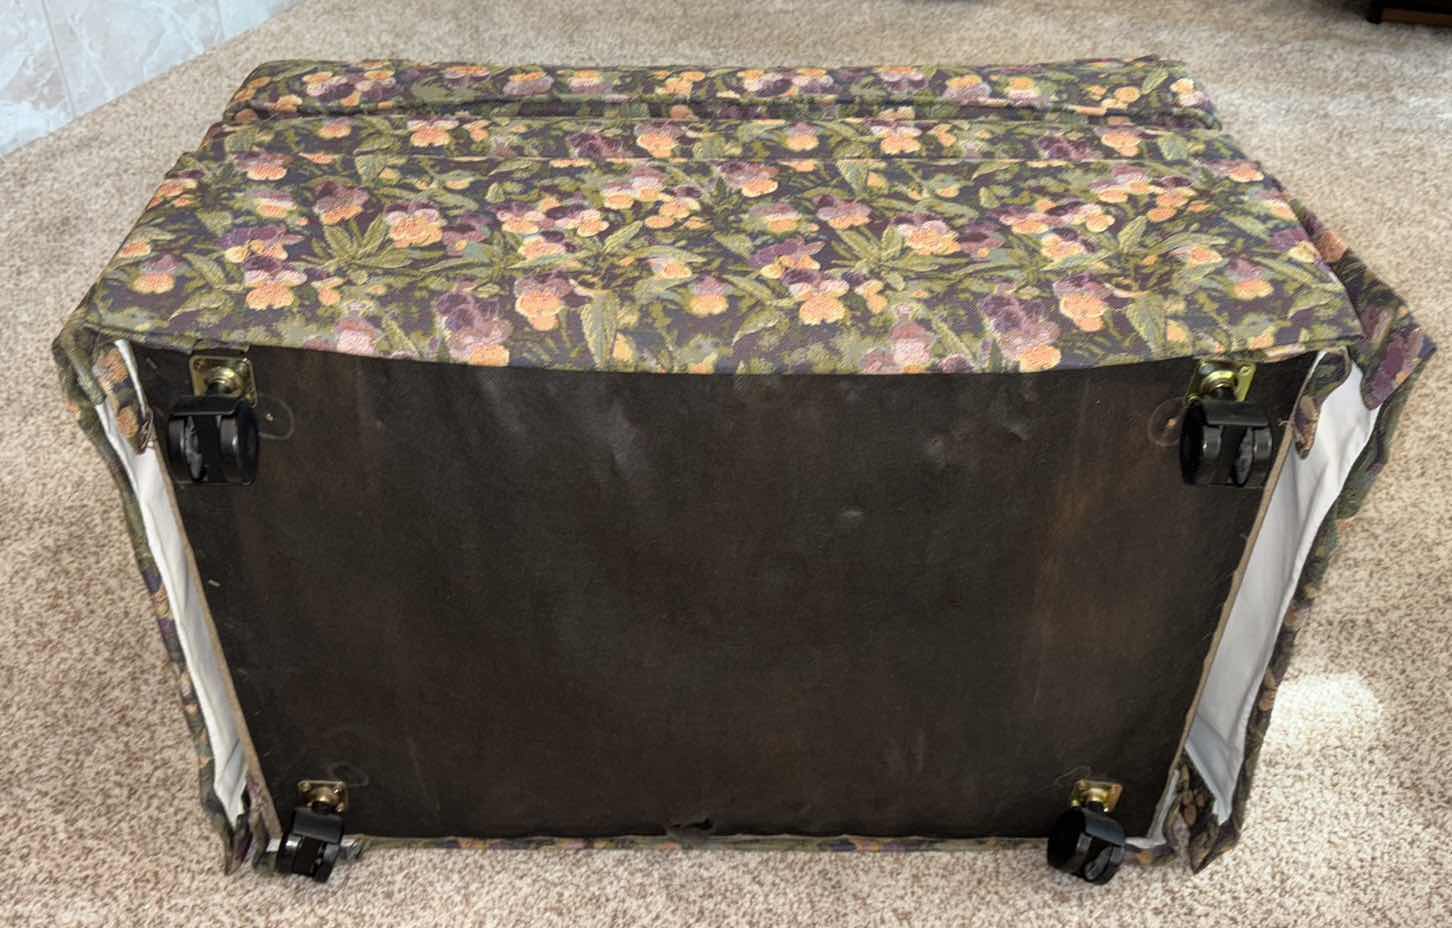 Photo 4 of FLORAL UPHOLSTERED OTTOMAN W CASTER WHEELS 21.5” x 30” H16.5”